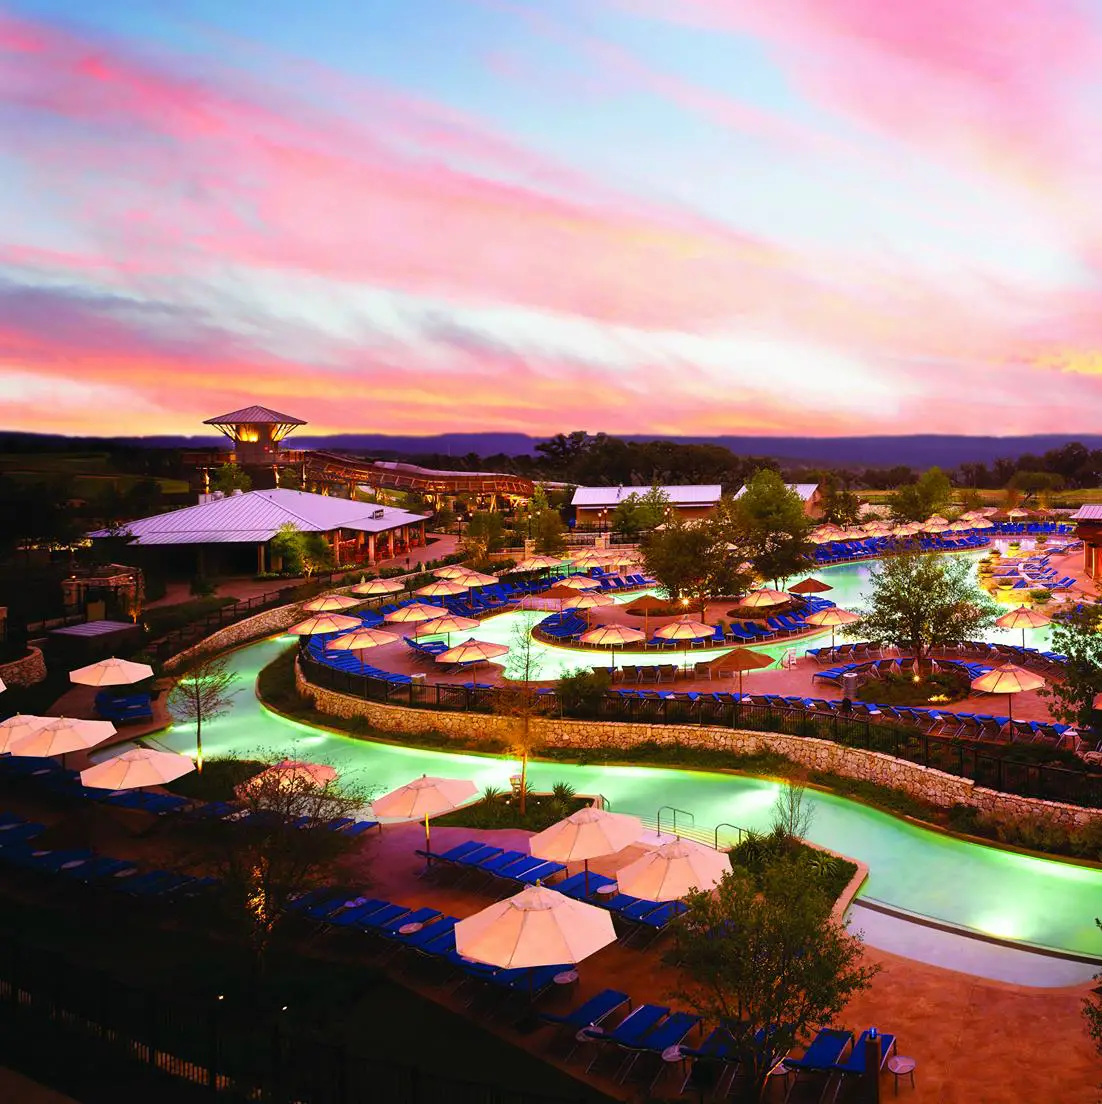 These Texas hotels make a splash on list of the best pools in America ...